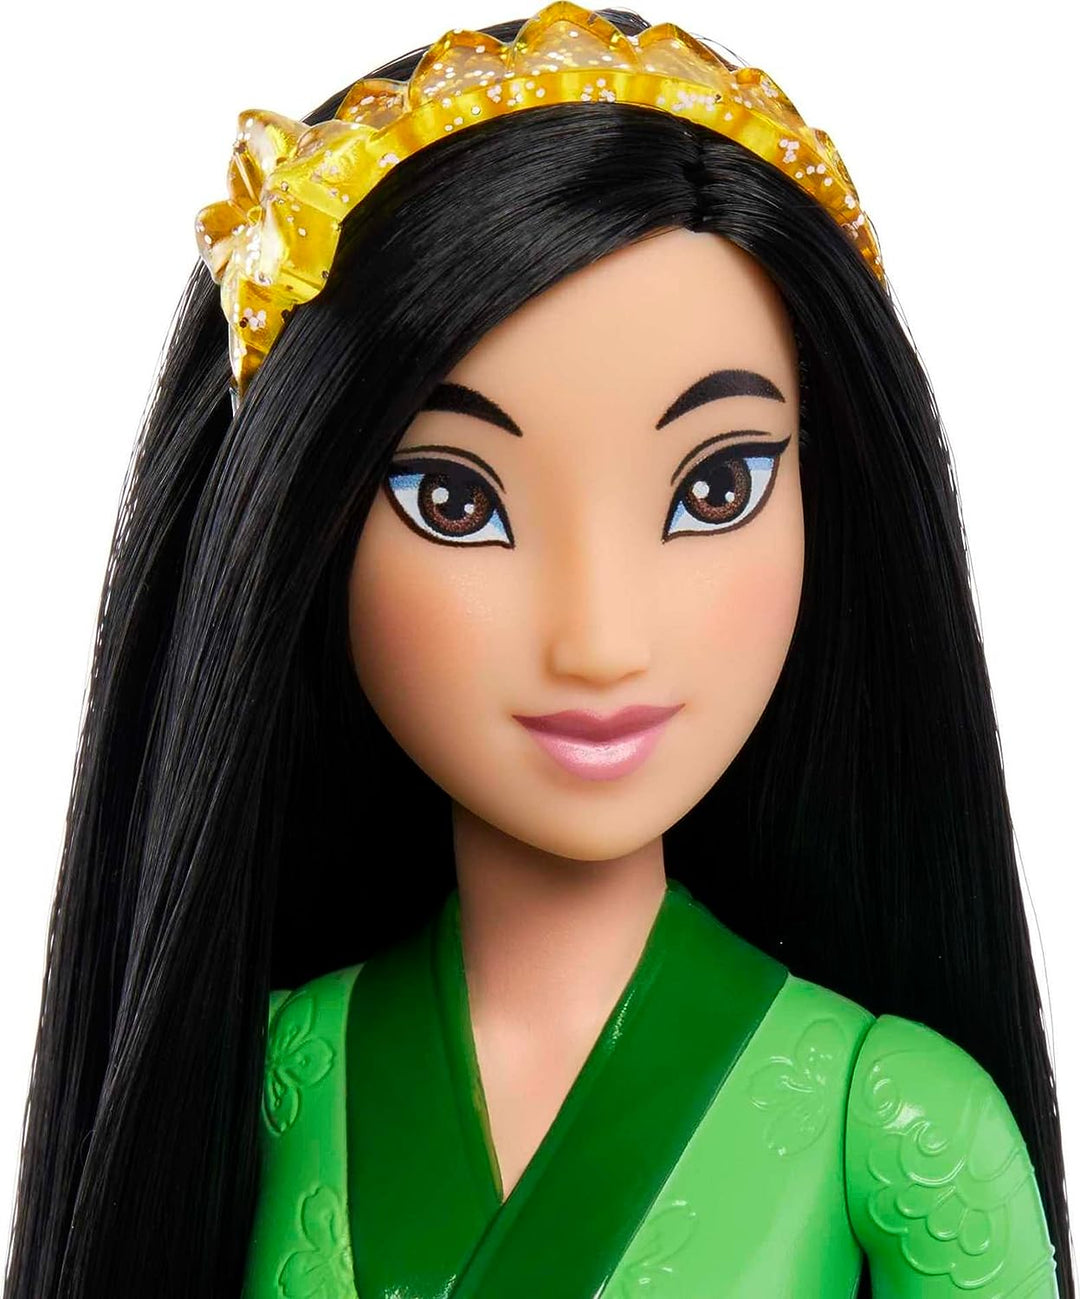 Disney Princess Toys, Mulan Posable Fashion Doll with Sparkling Clothing and Accessories